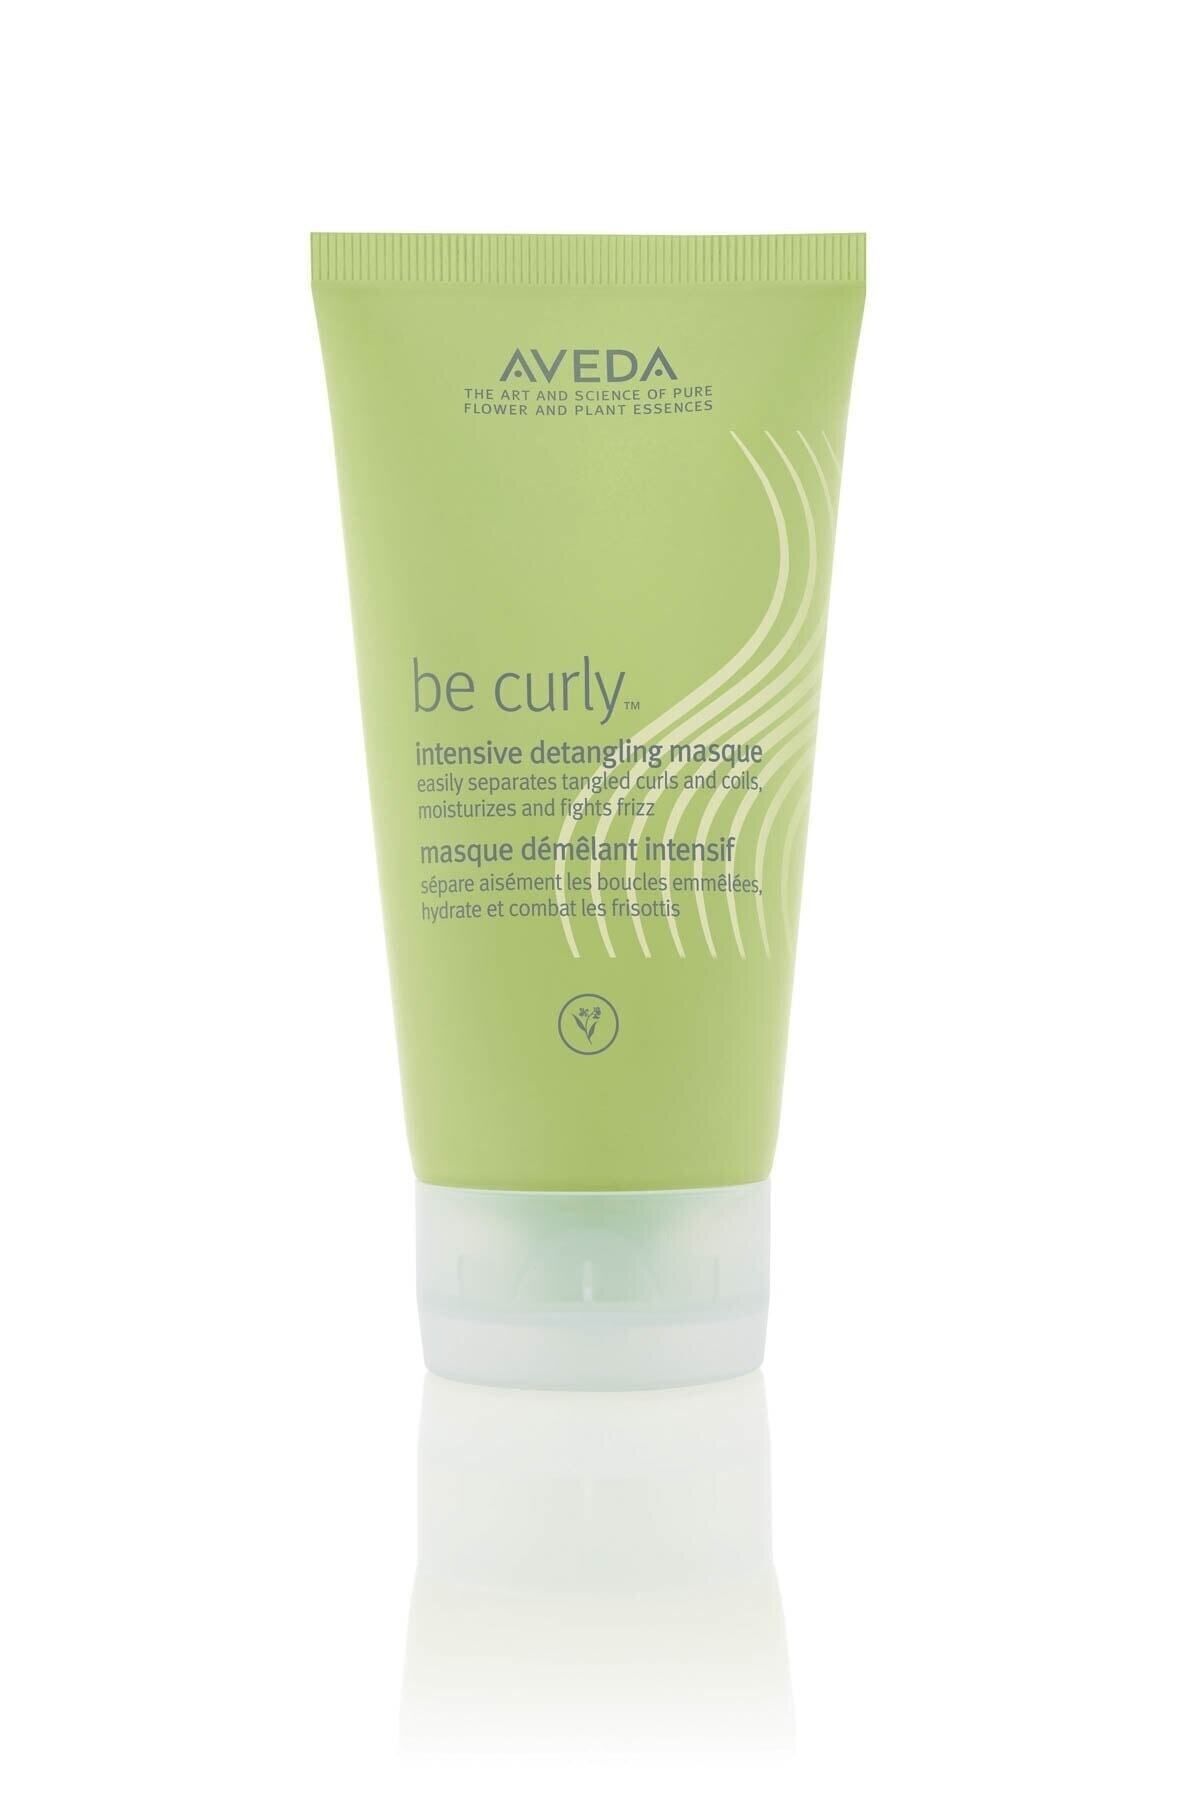 Aveda Be Curly Curl Detangling and Moisturizing Hair Mask 150mlKEYKUAFORR3770